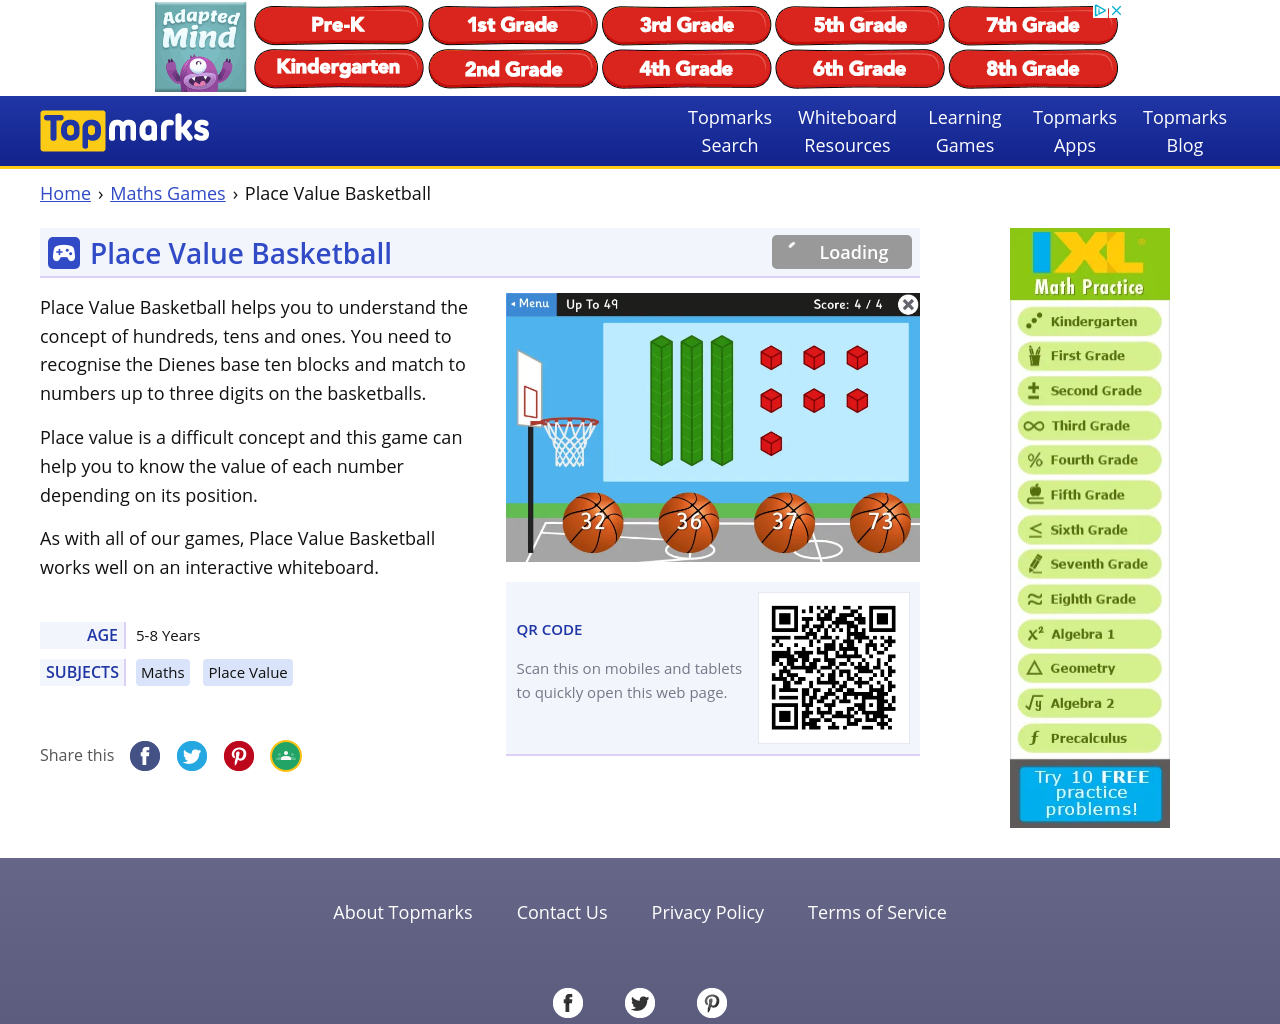 TopMarks: Place Value Basketball